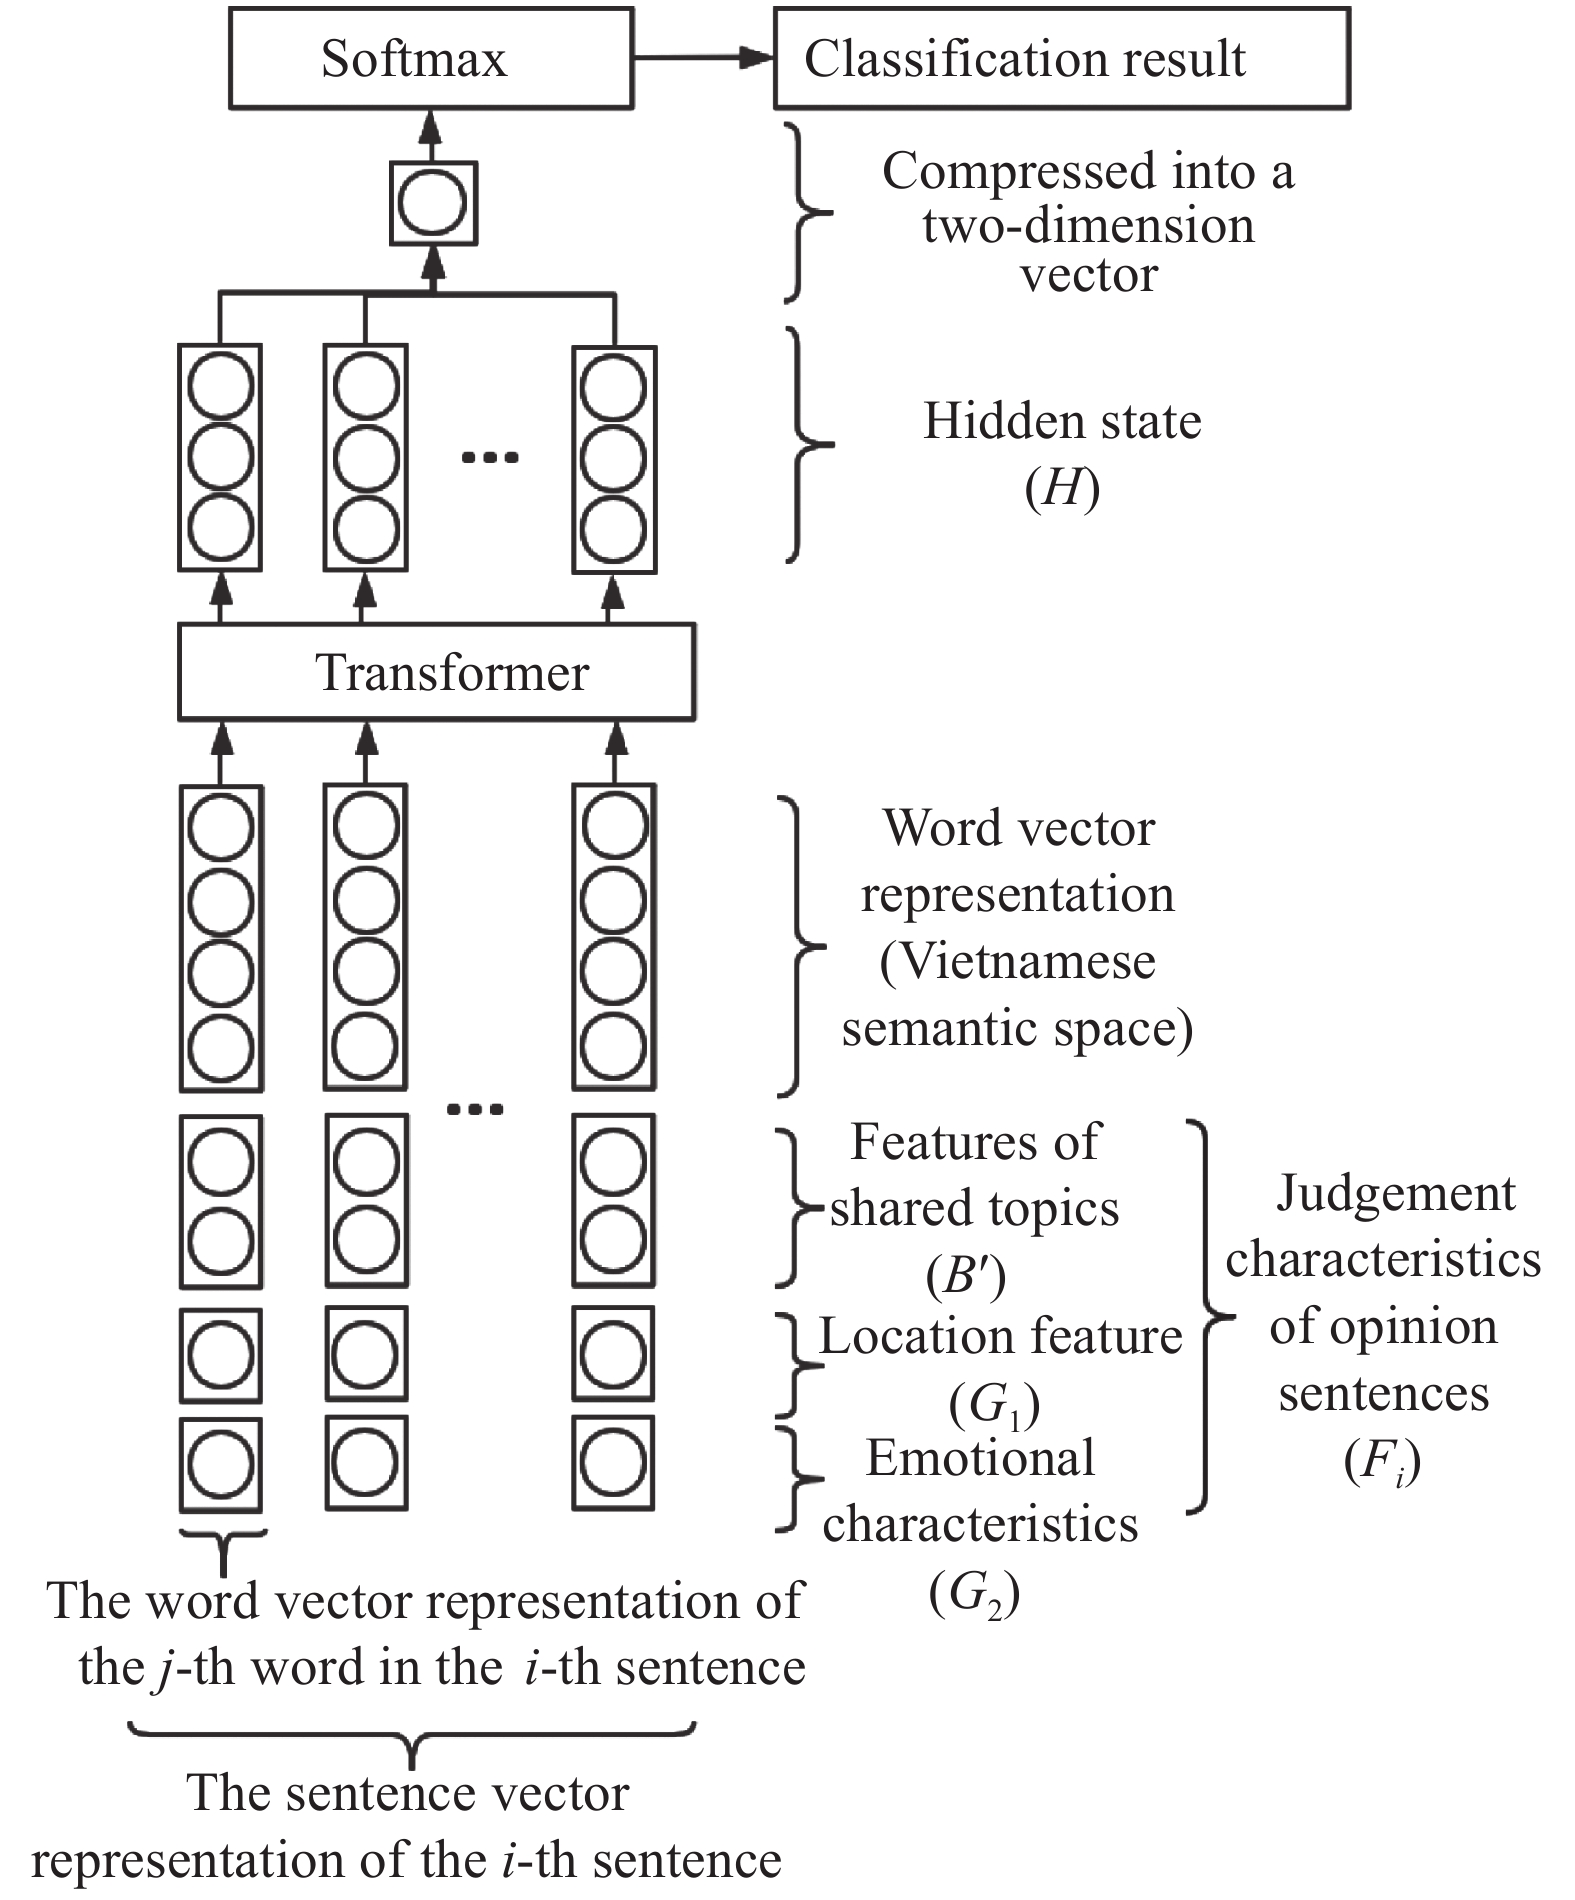 Opinion sentence extraction model incorporating the discriminative features of opinion sentences